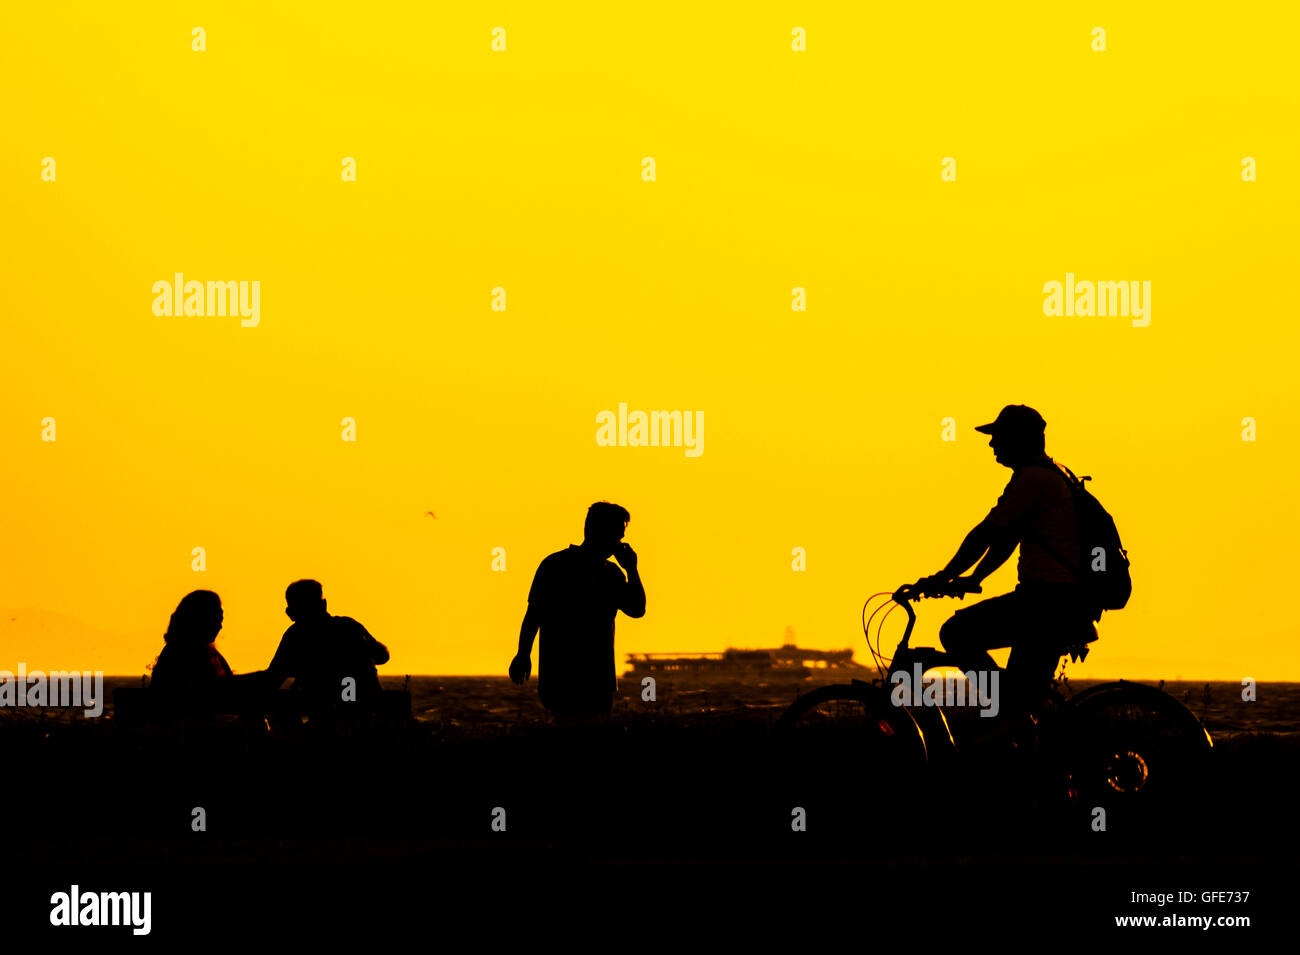 Silhouette people in Izmir Turkey. Bicycle riding man, a phone calling man, and two people sitting on a bench near the seaside i Stock Photo